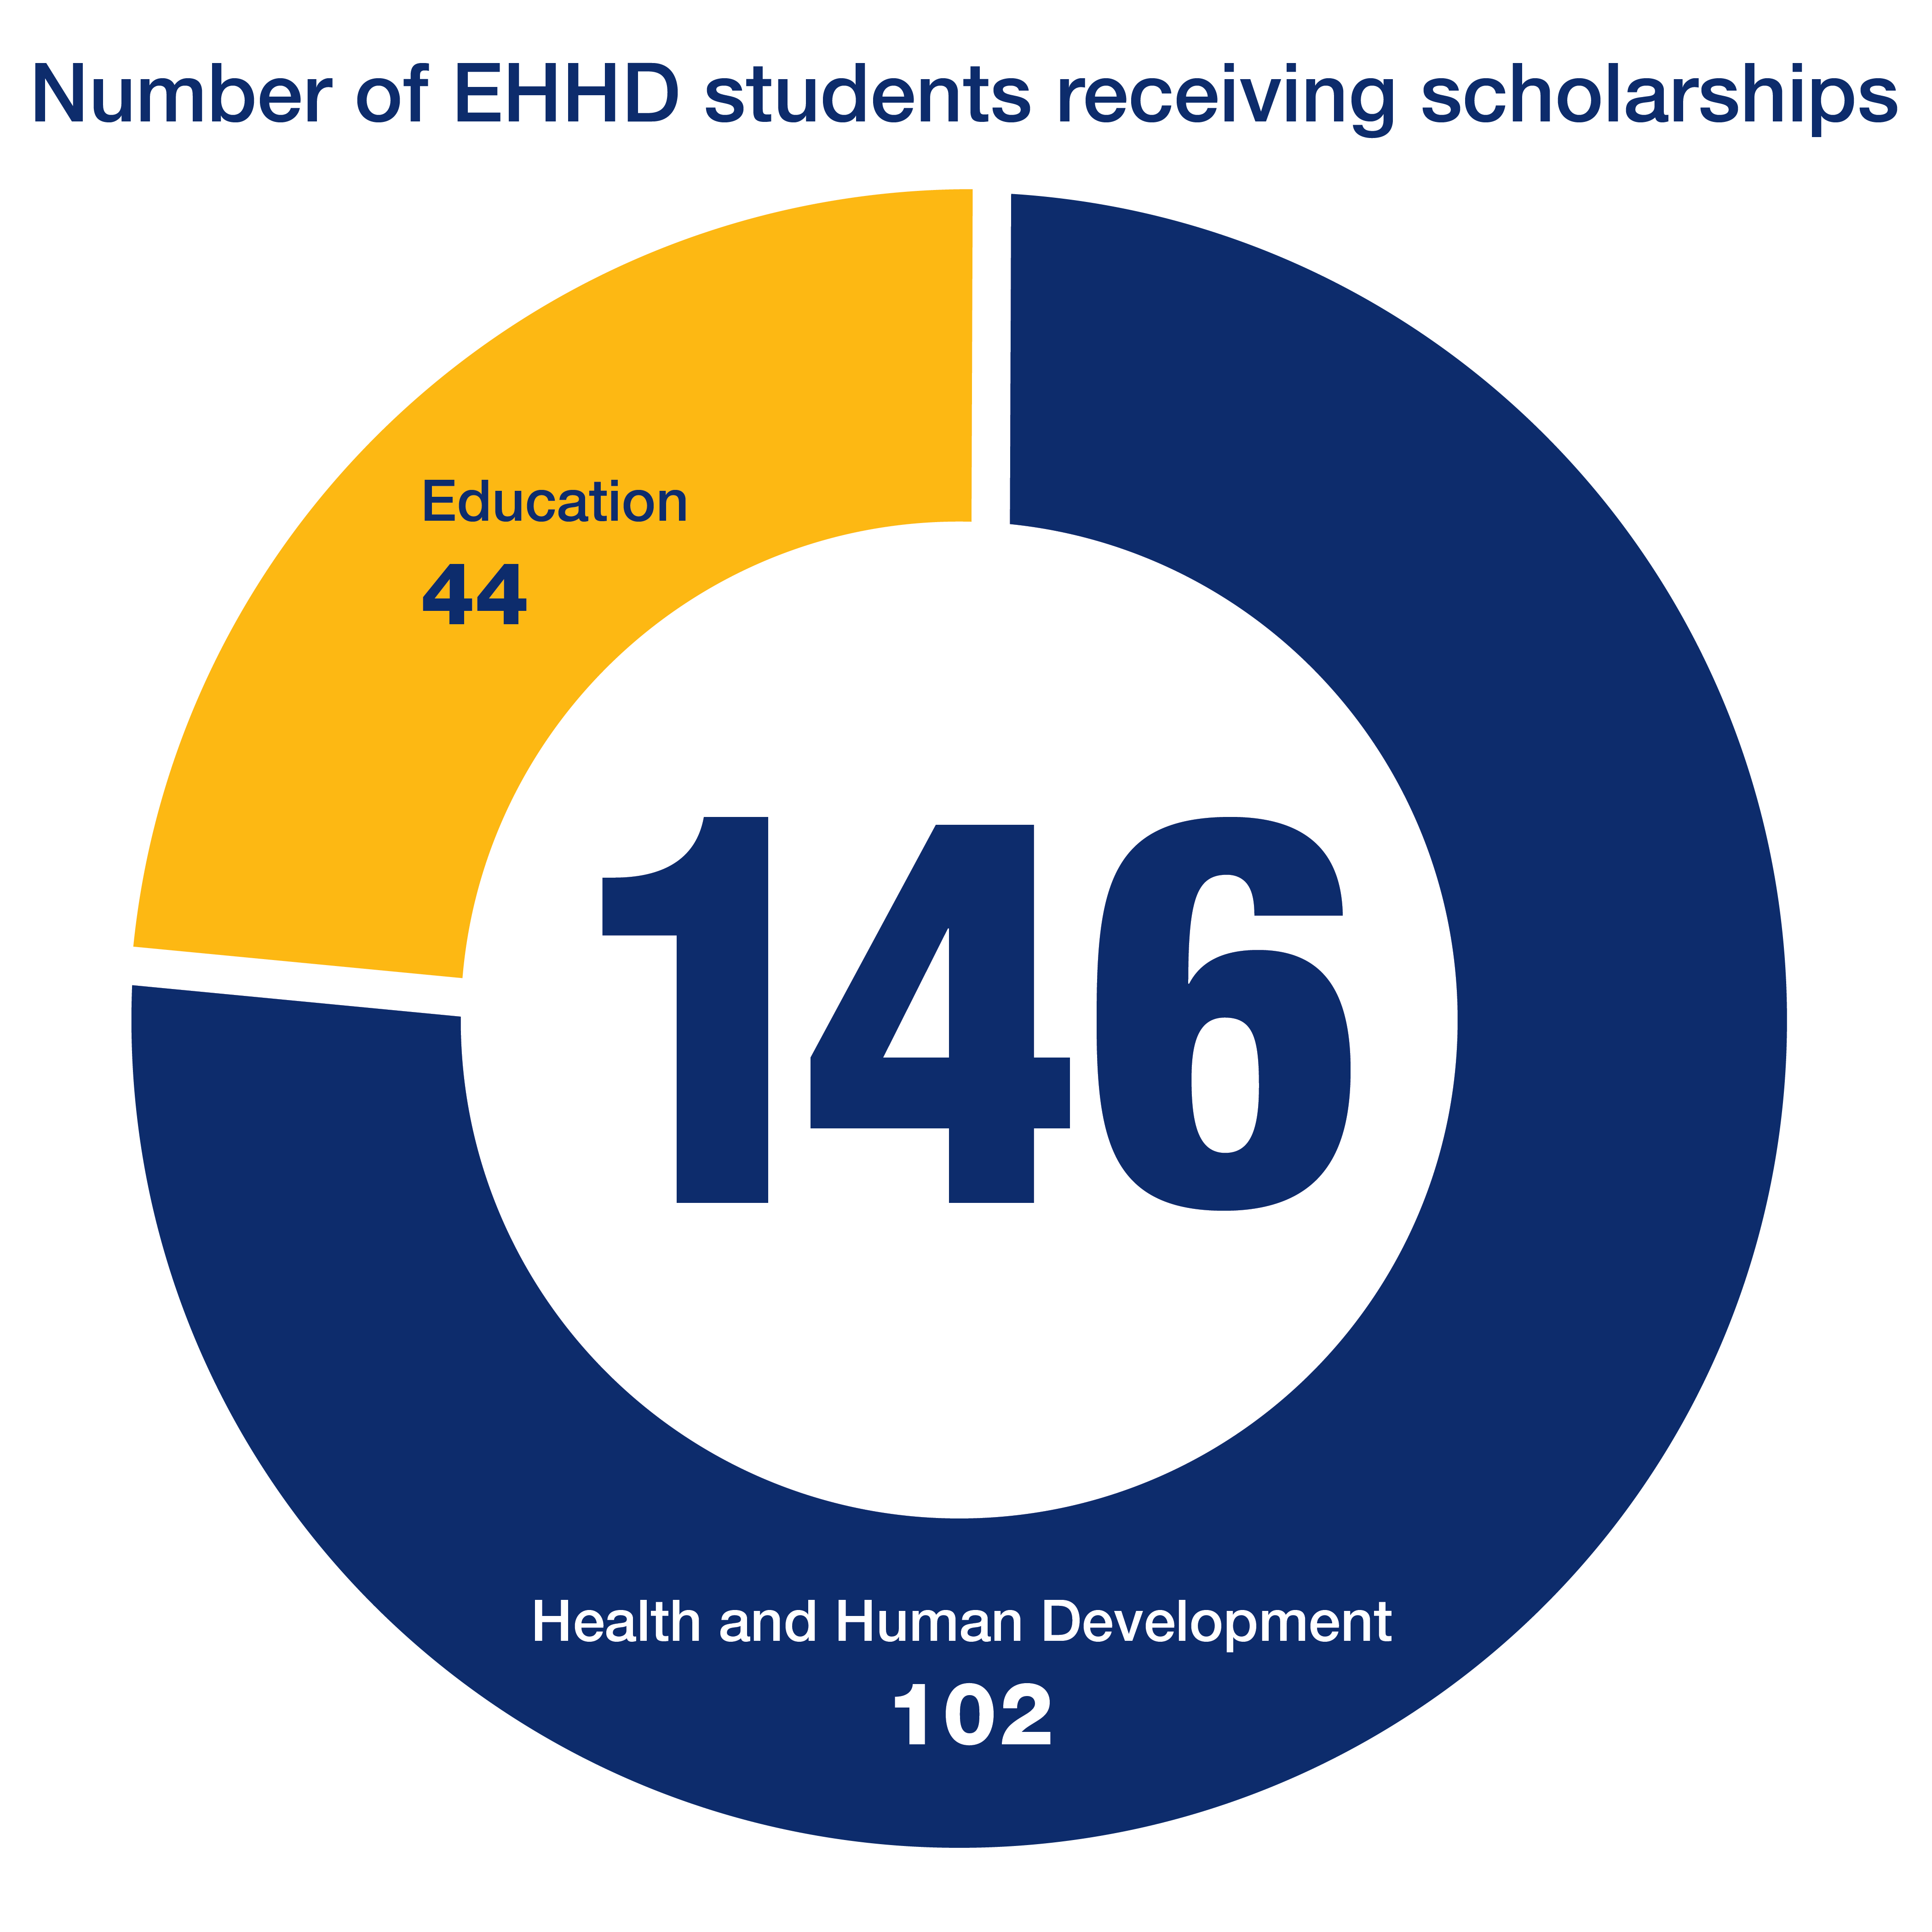 Number of EHHD students receiving scholarships